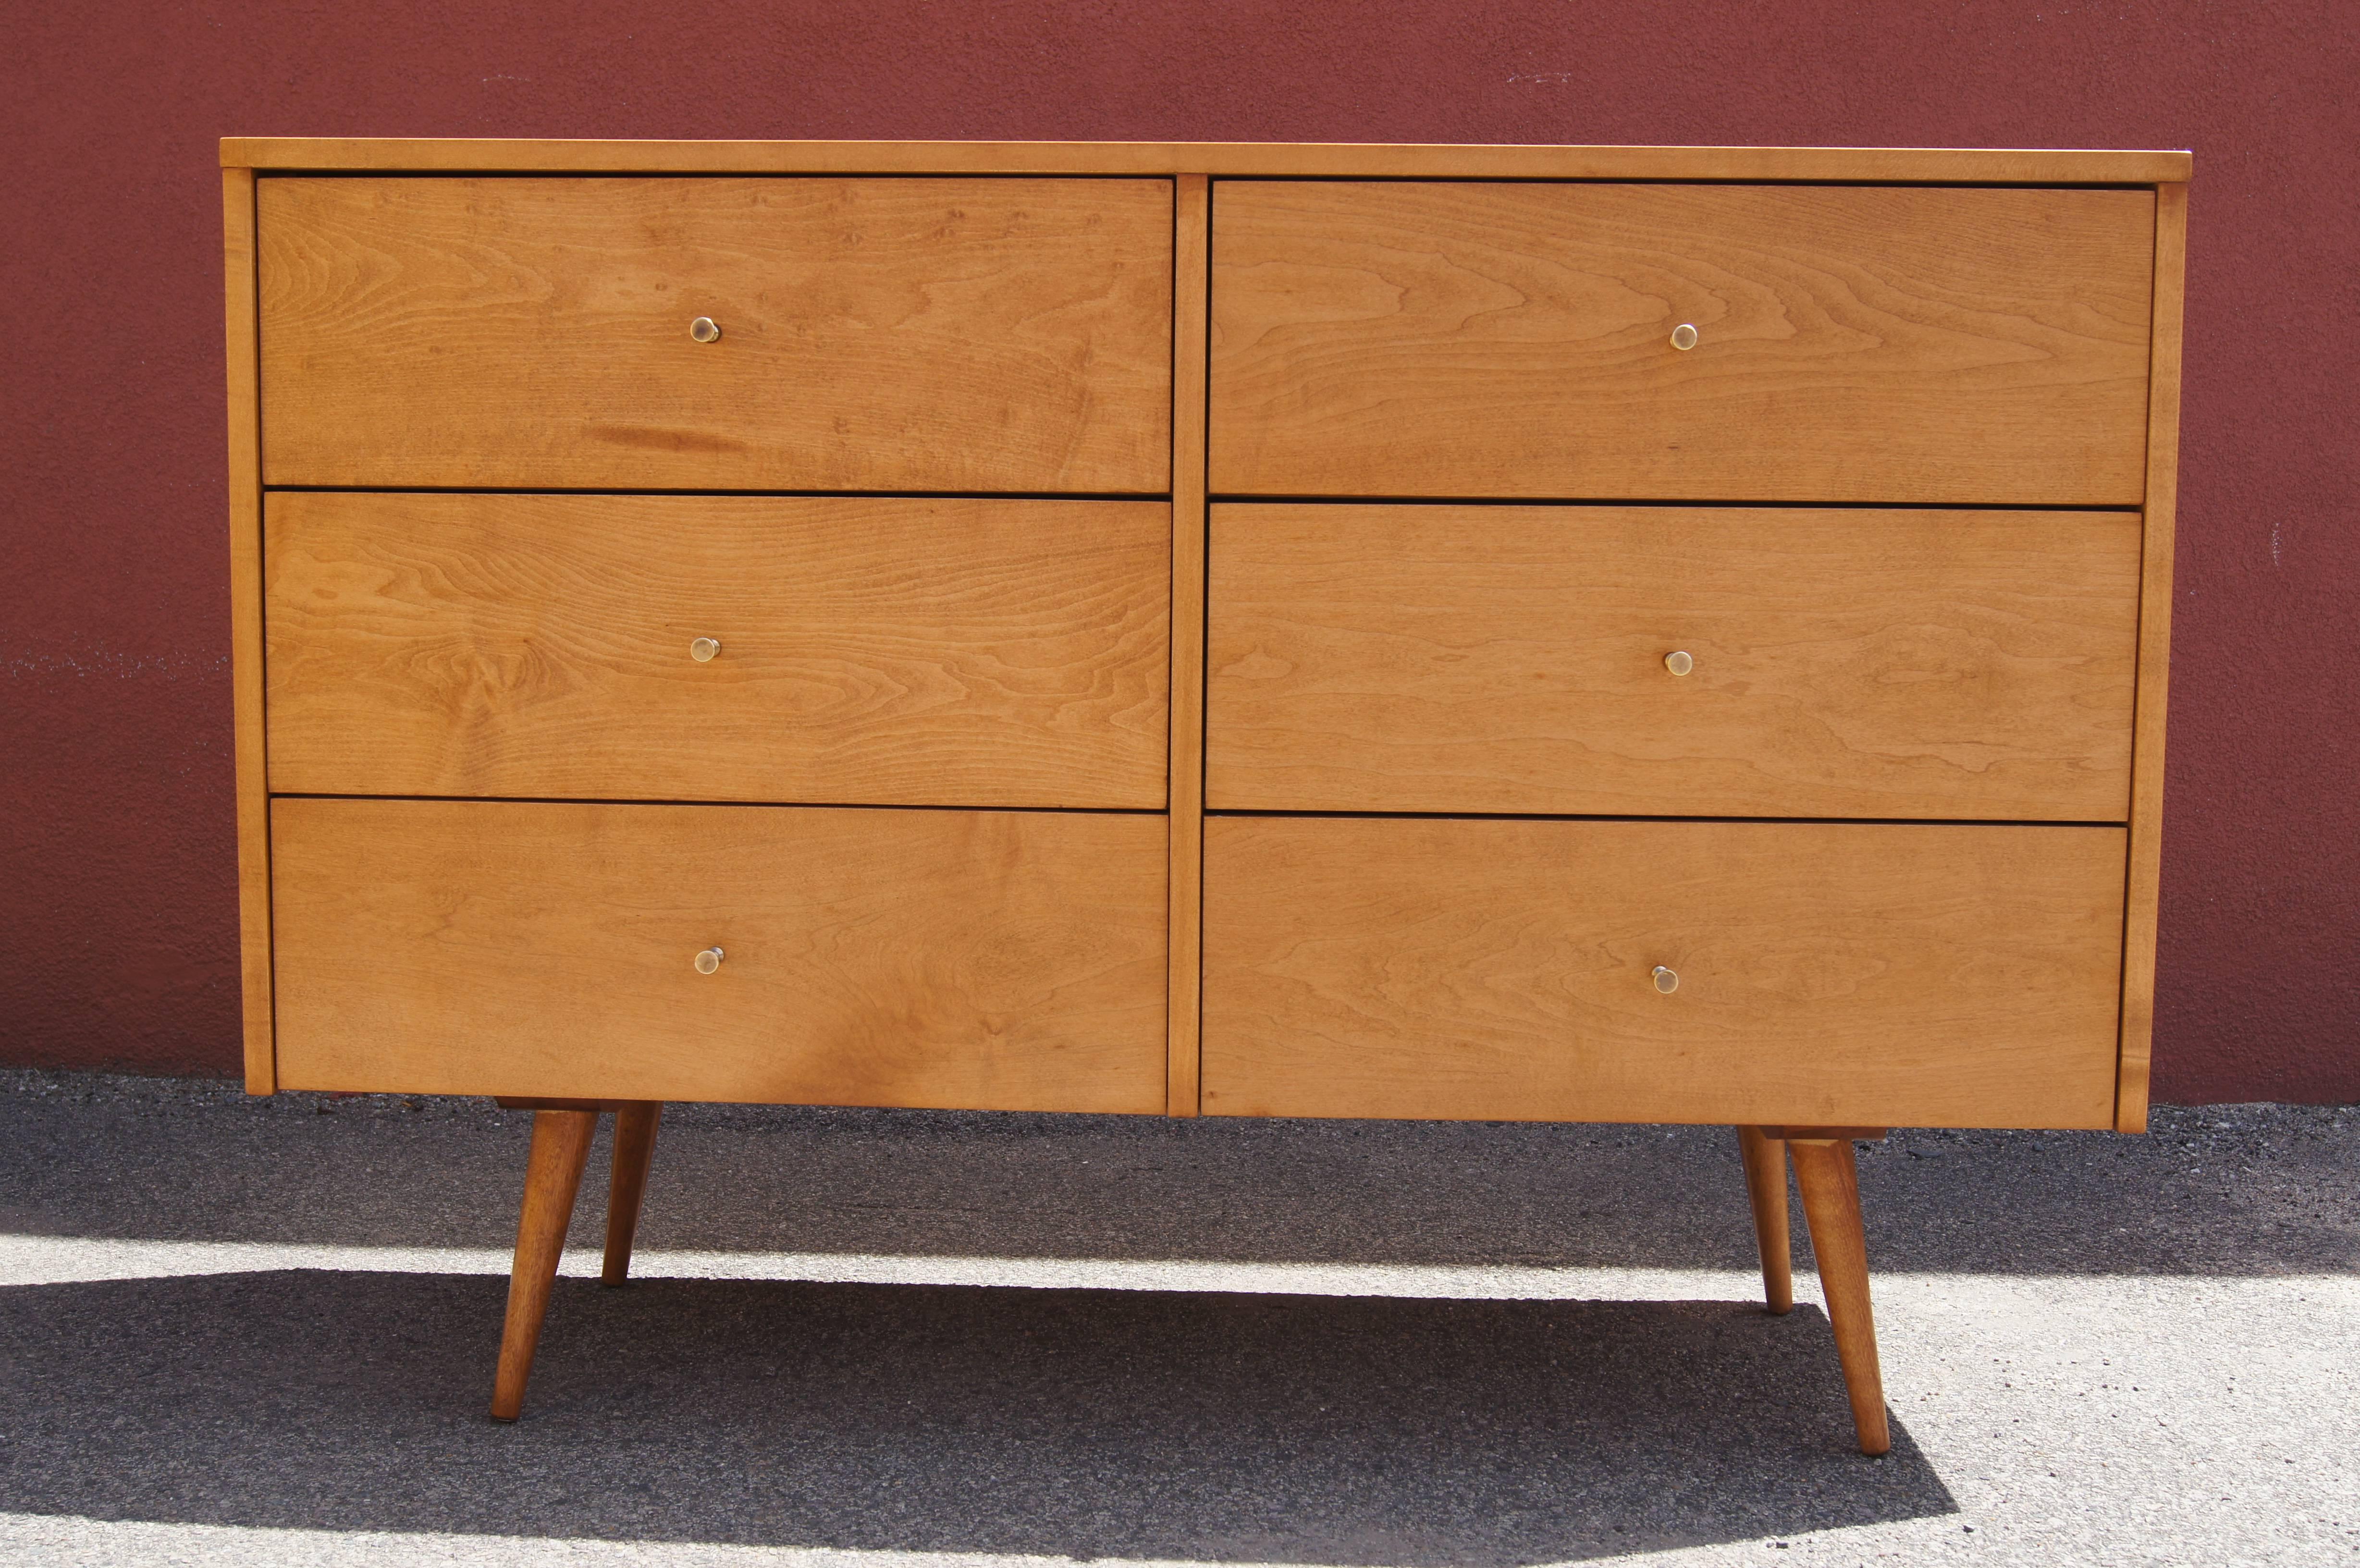 Paul McCobb designed this dresser, model 1509, as part of Winchendon's Planner Group. The maple case, set on tapered and canted legs, has two banks of three drawers, each with a conical brass pull.

A corresponding twenty-drawer dresser is also